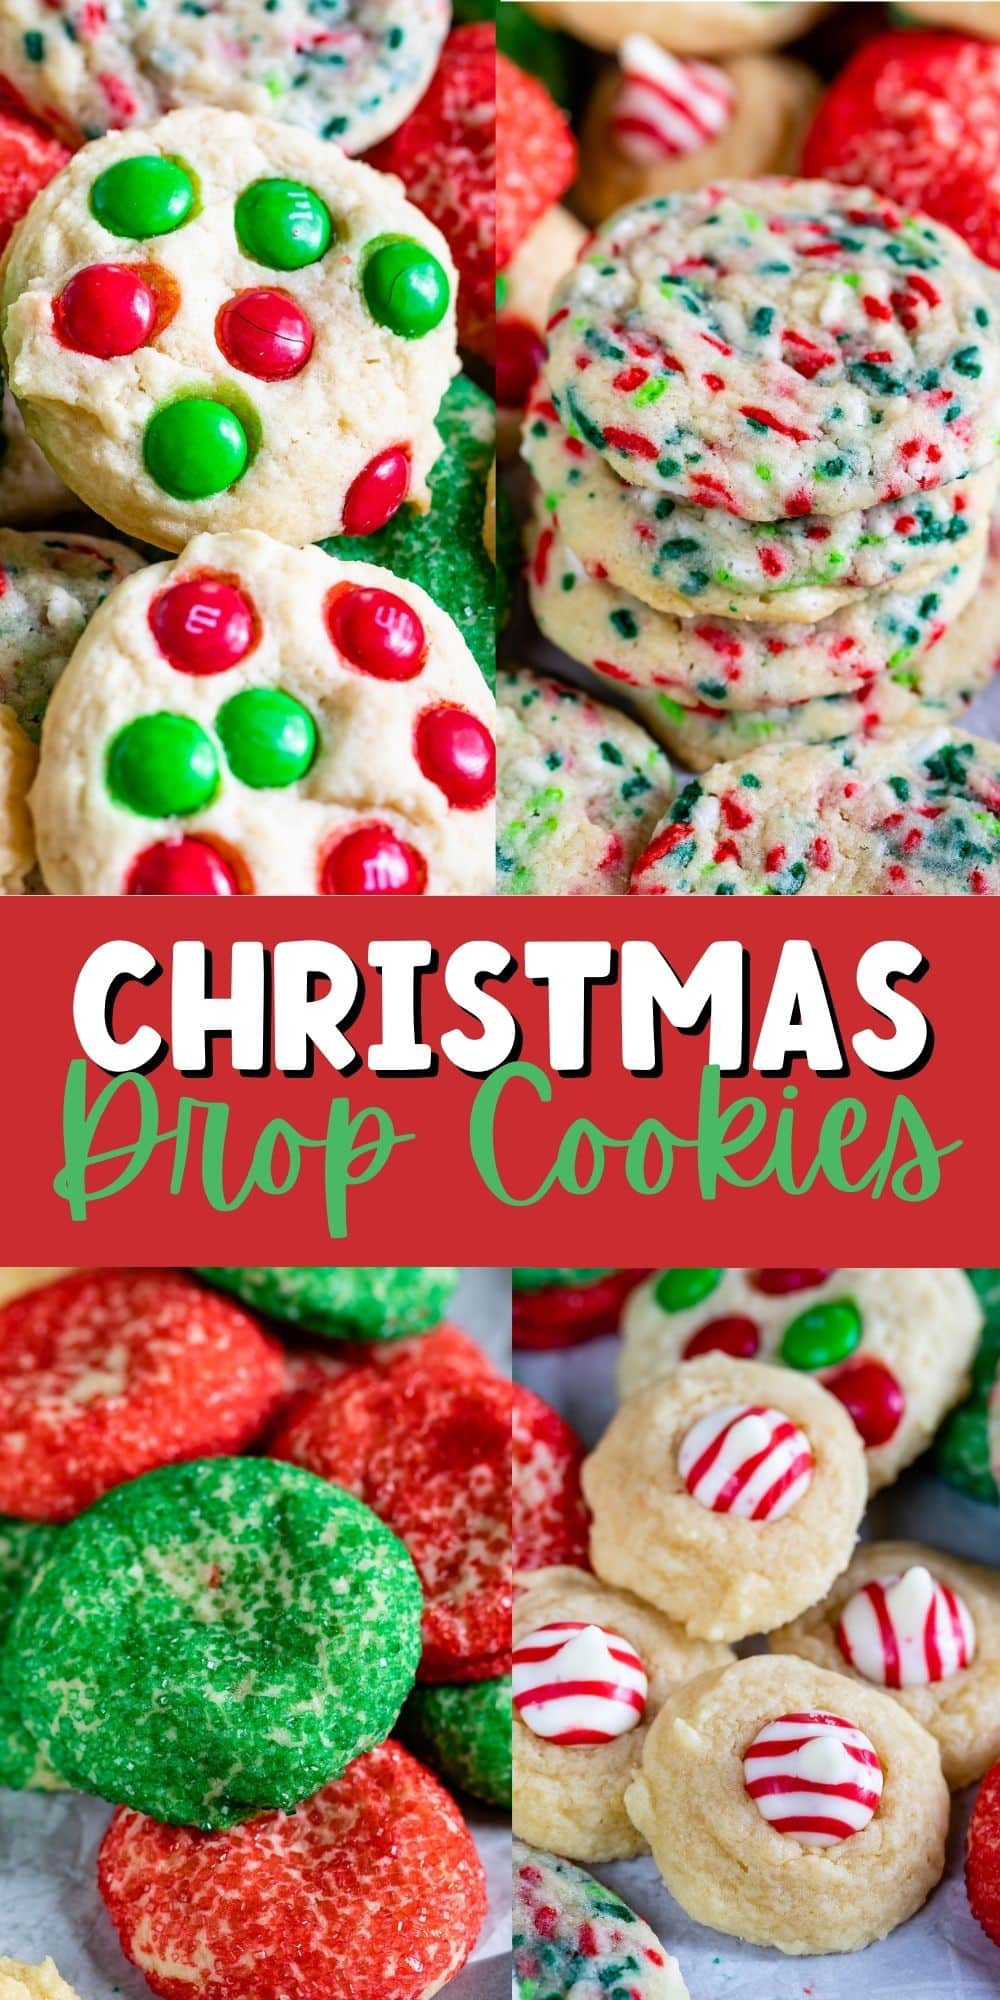 four photos of different styled christmas cookies with red and green ingredients baked into the cookies with words in the middle